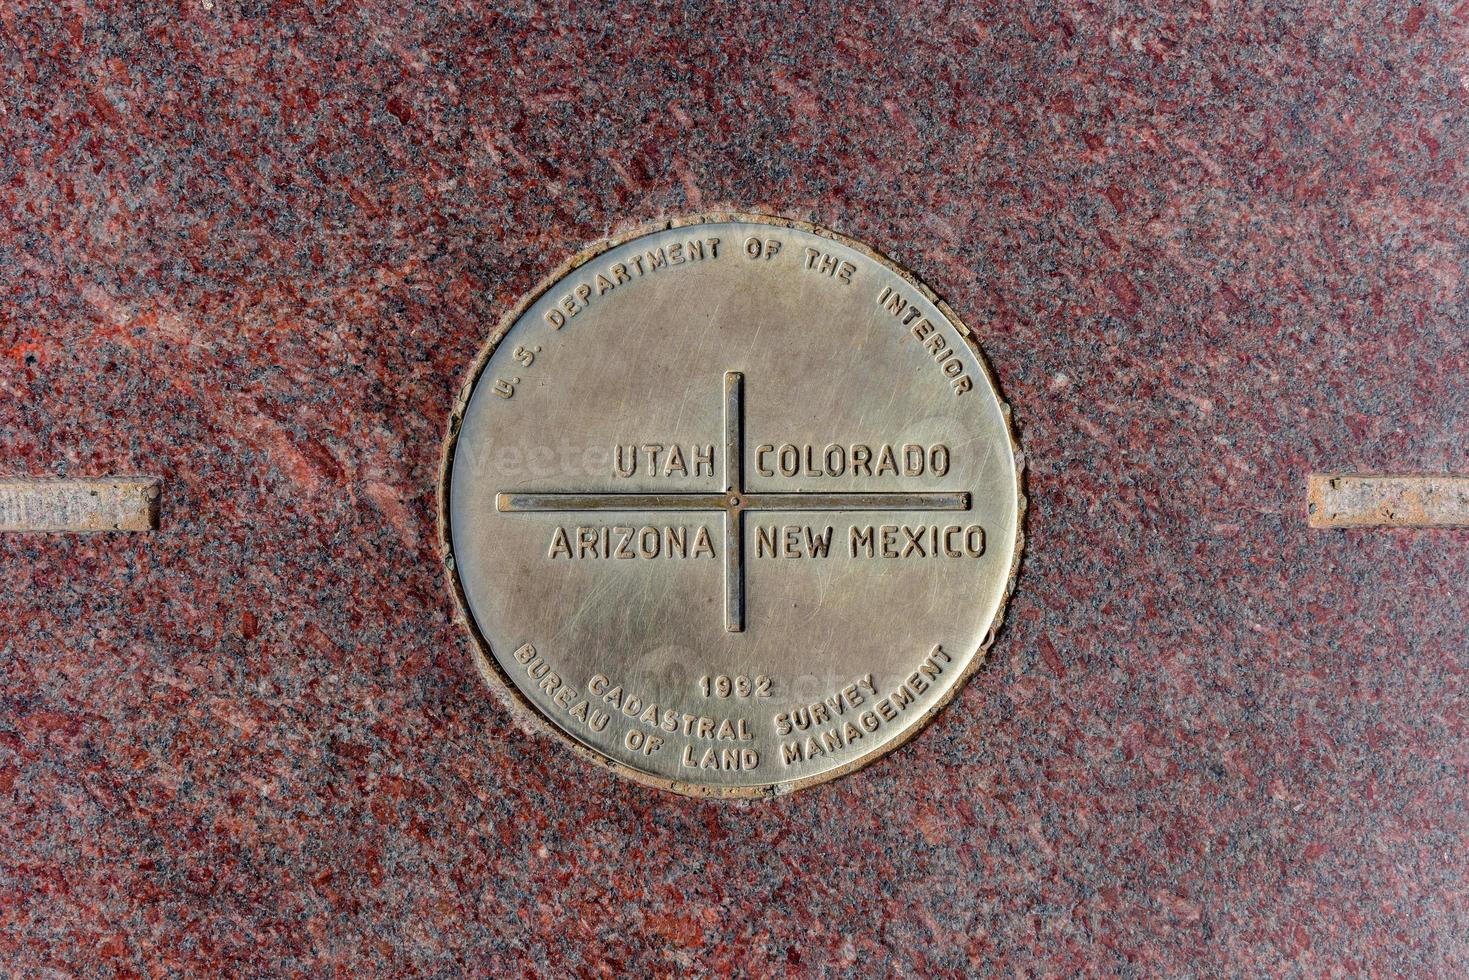 The Four Corners Monument marks the quadripoint in the Southwestern United States where the states of Arizona, Colorado, New Mexico, and Utah meet. photo